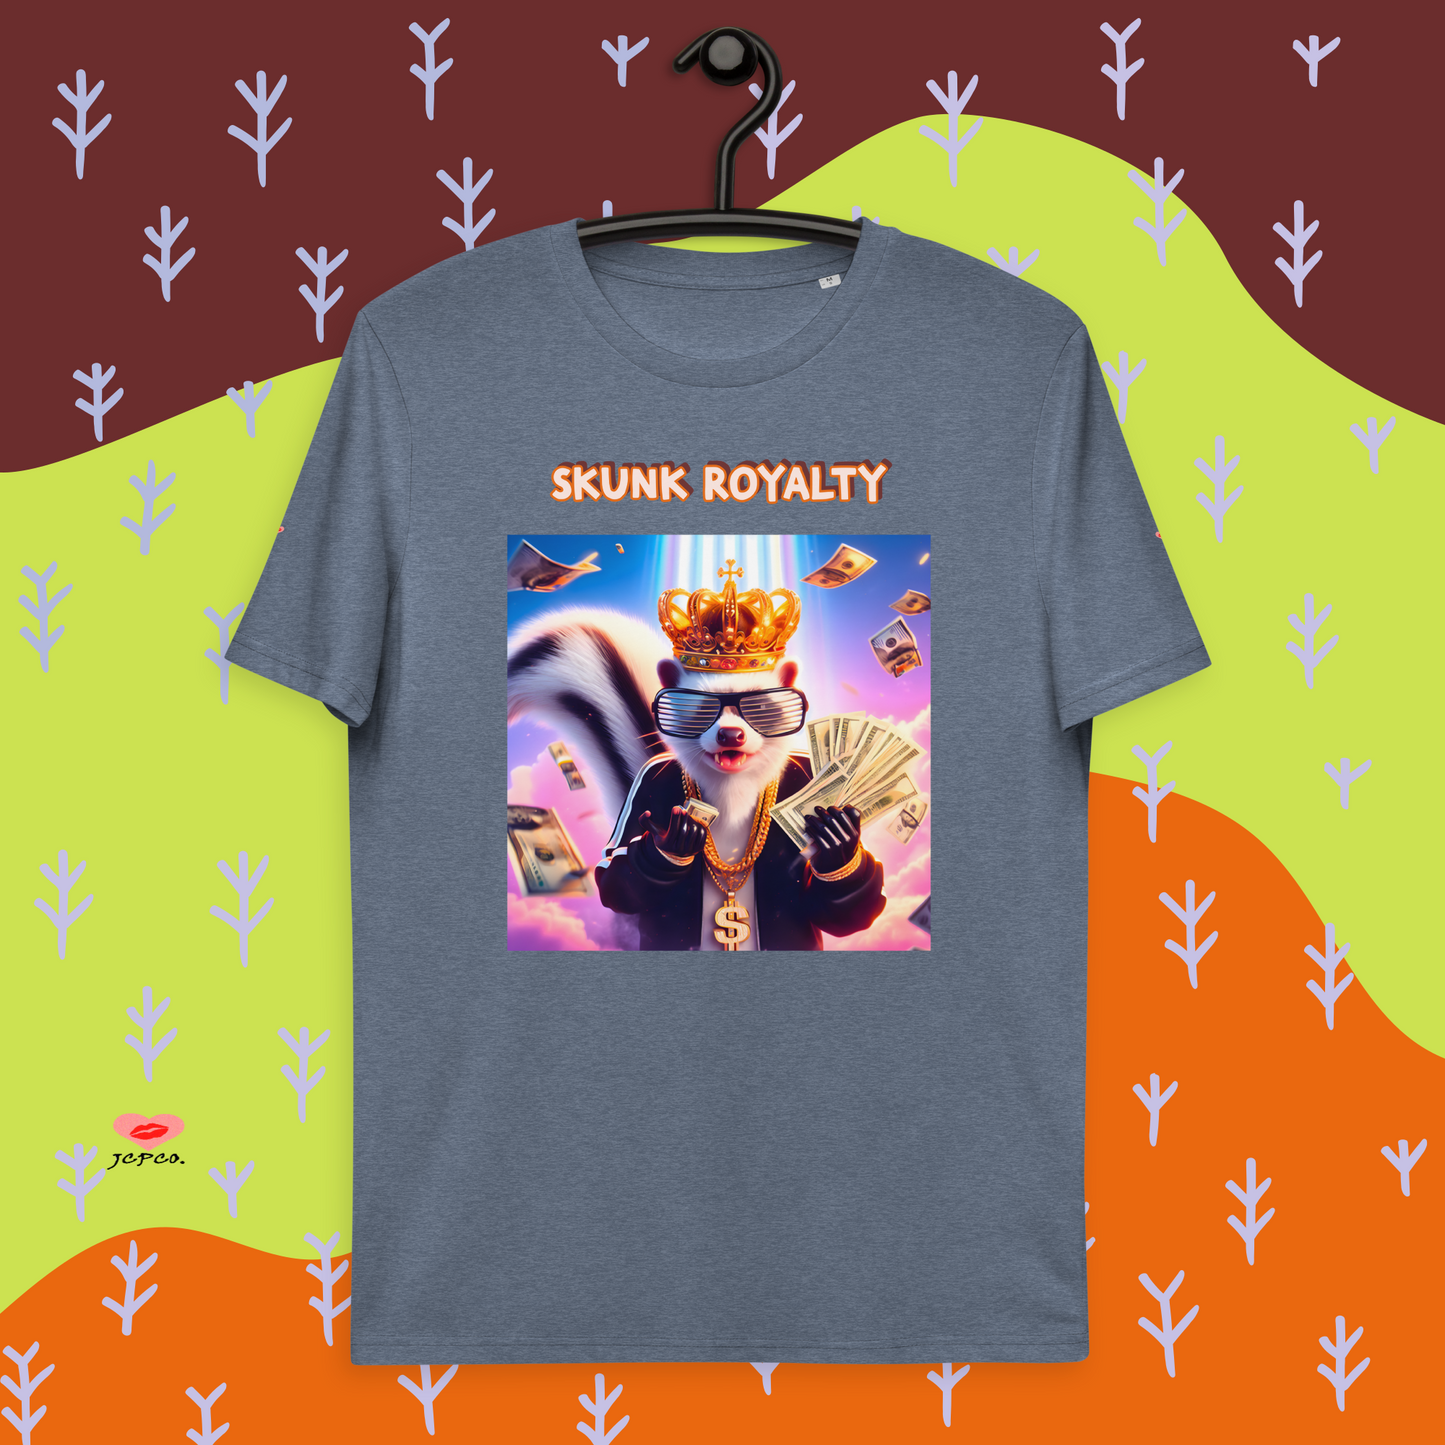 👑Skunk Swagger 🦨Skunk Royalty Can't Be Beat Aromas Crowned💎Unisex organic cotton t-shirt👕